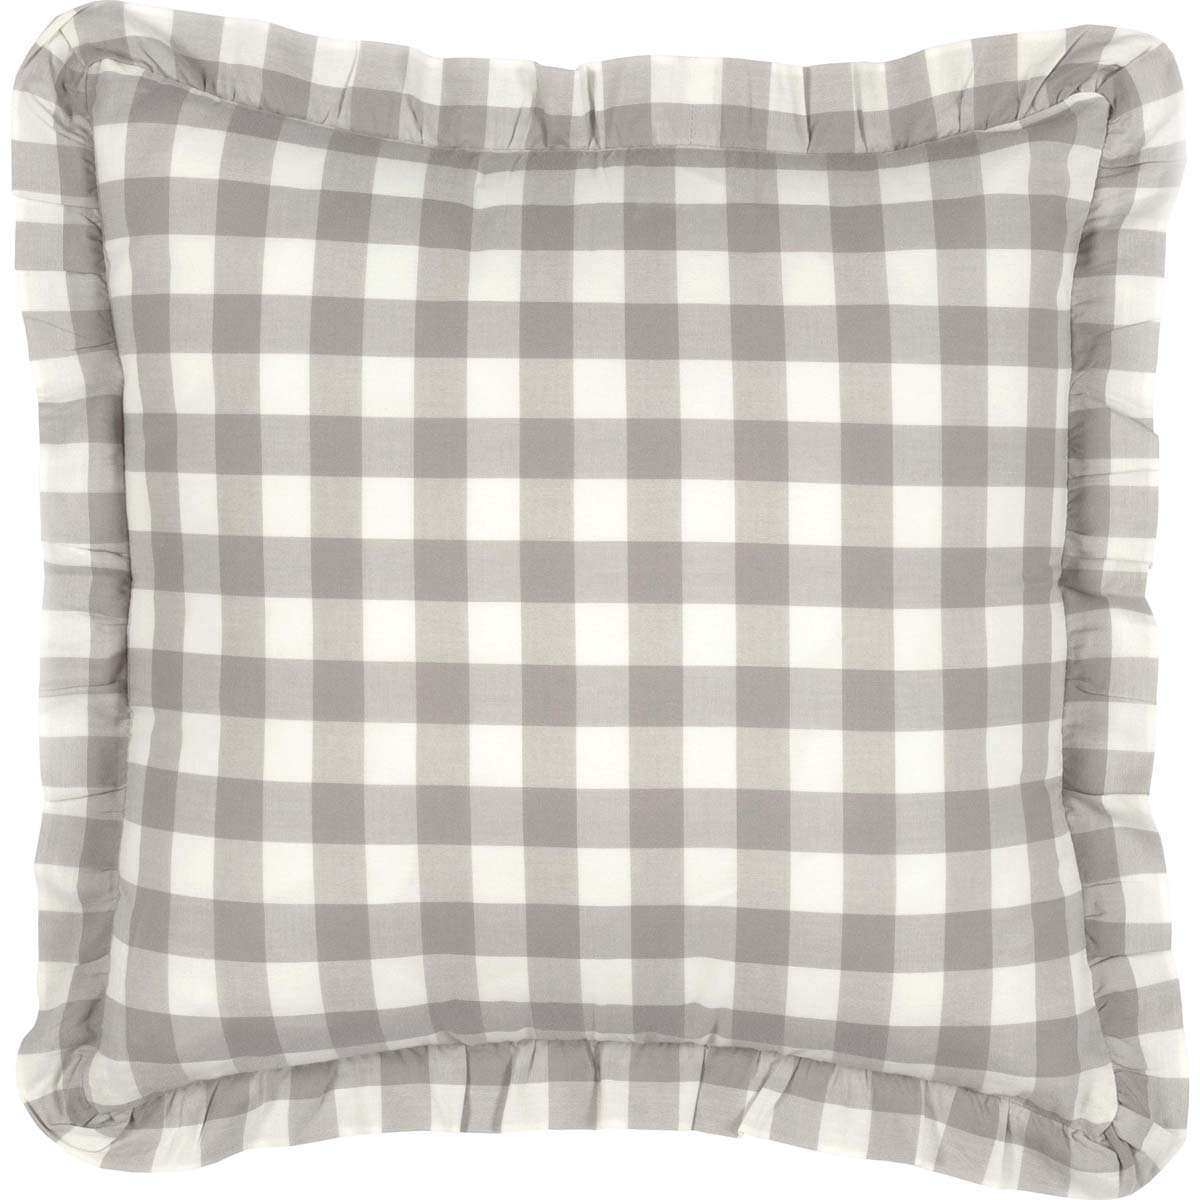 Annie Buffalo Check Ruffled Fabric Pillow Black, Grey, Red Pillows VHC Brands Grey 